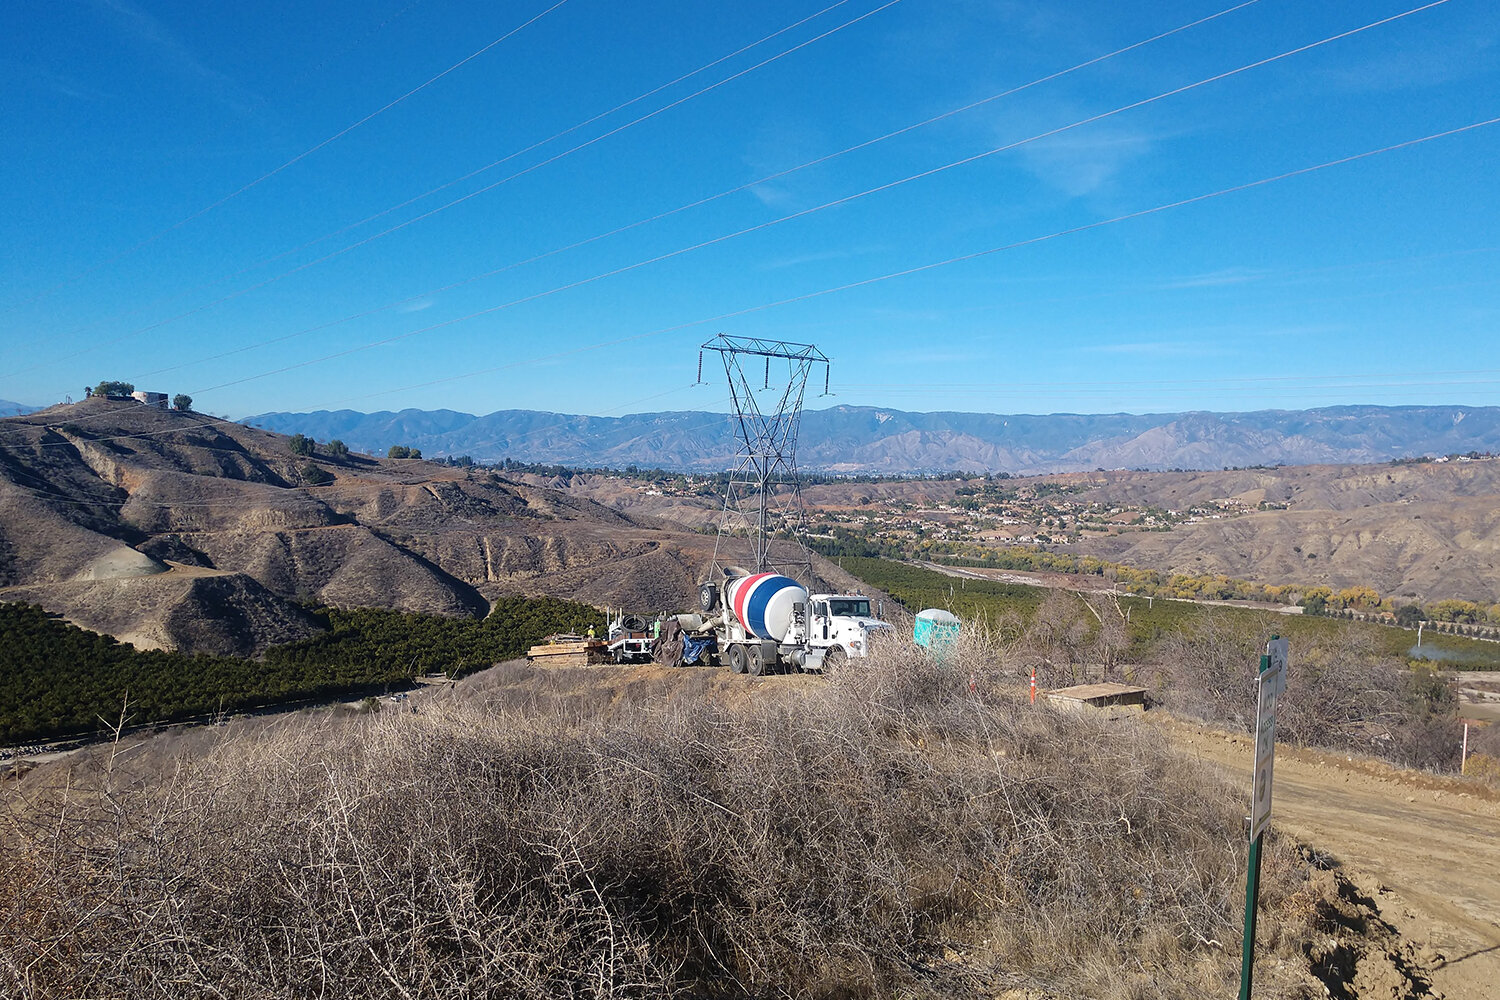 aldridge-drilling-foundations-california-limited-access-infrastructure-construction.jpg